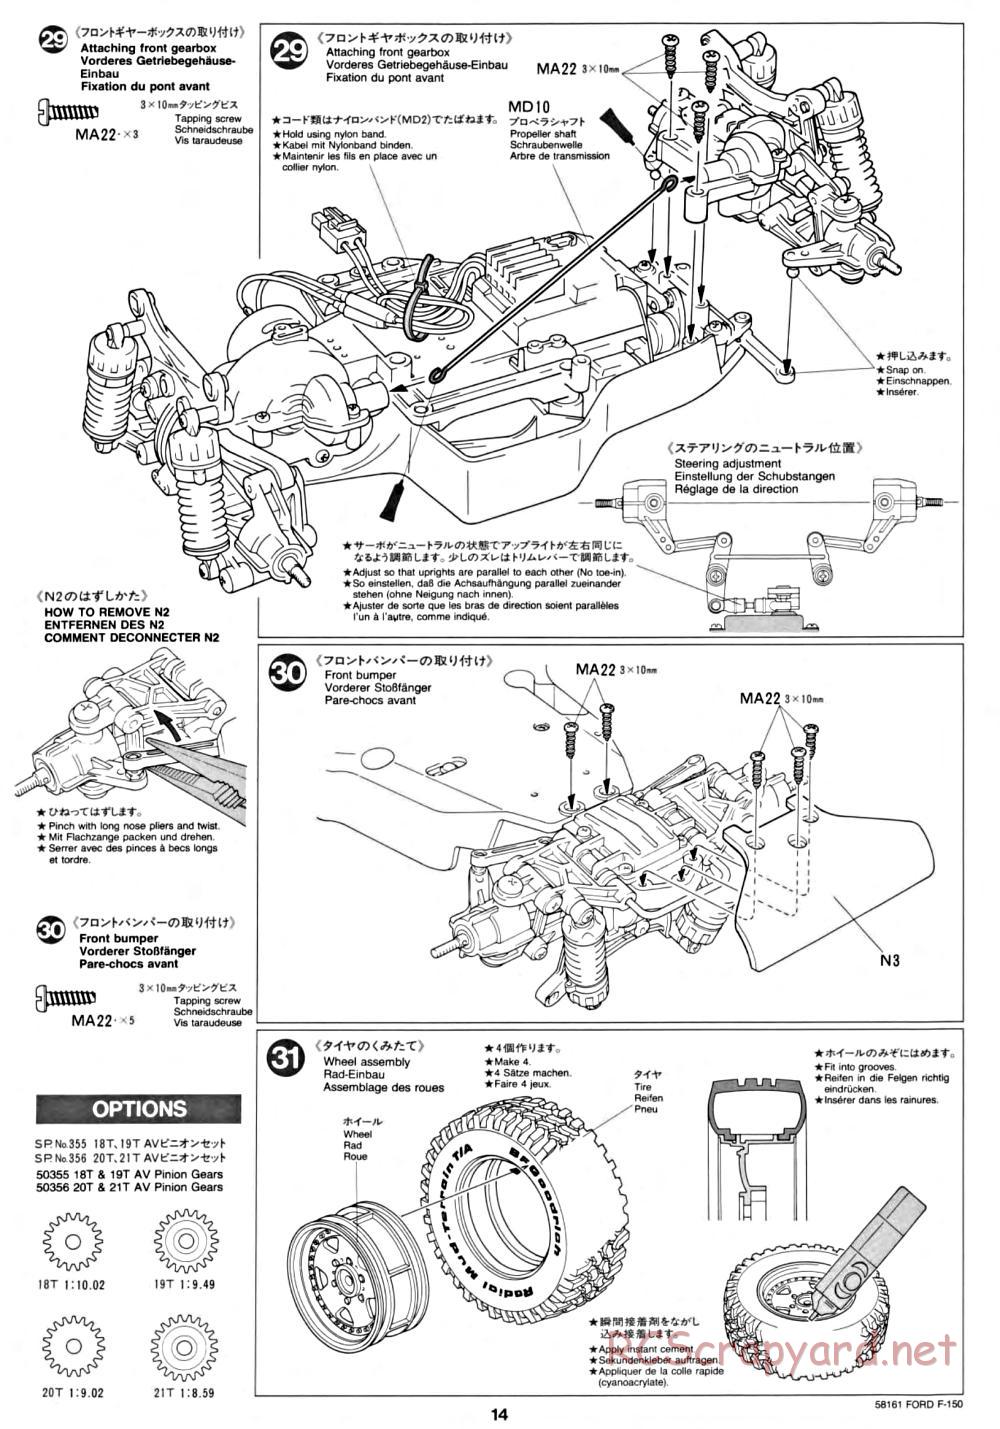 Tamiya - Ford F-150 Truck Chassis - Manual - Page 14